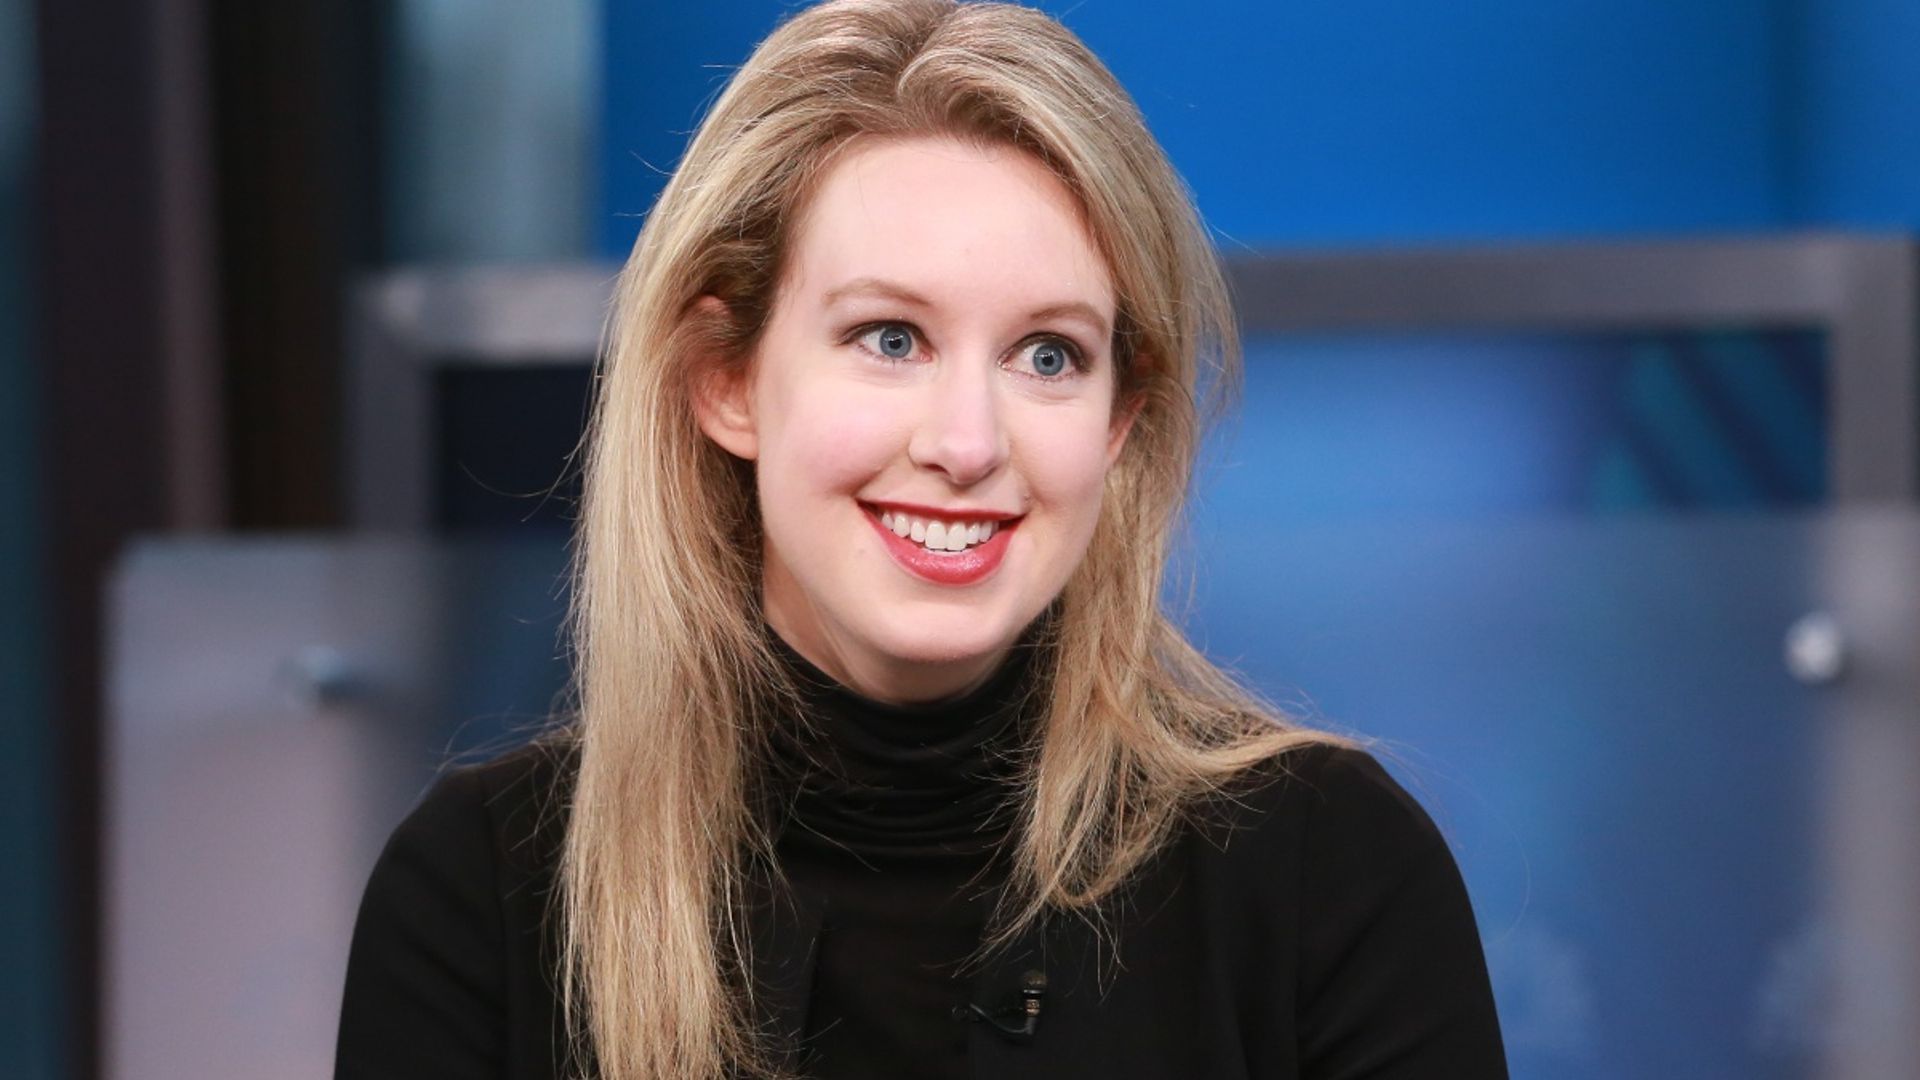 The Dropout: where is founder of Theranos Elizabeth Holmes now? 